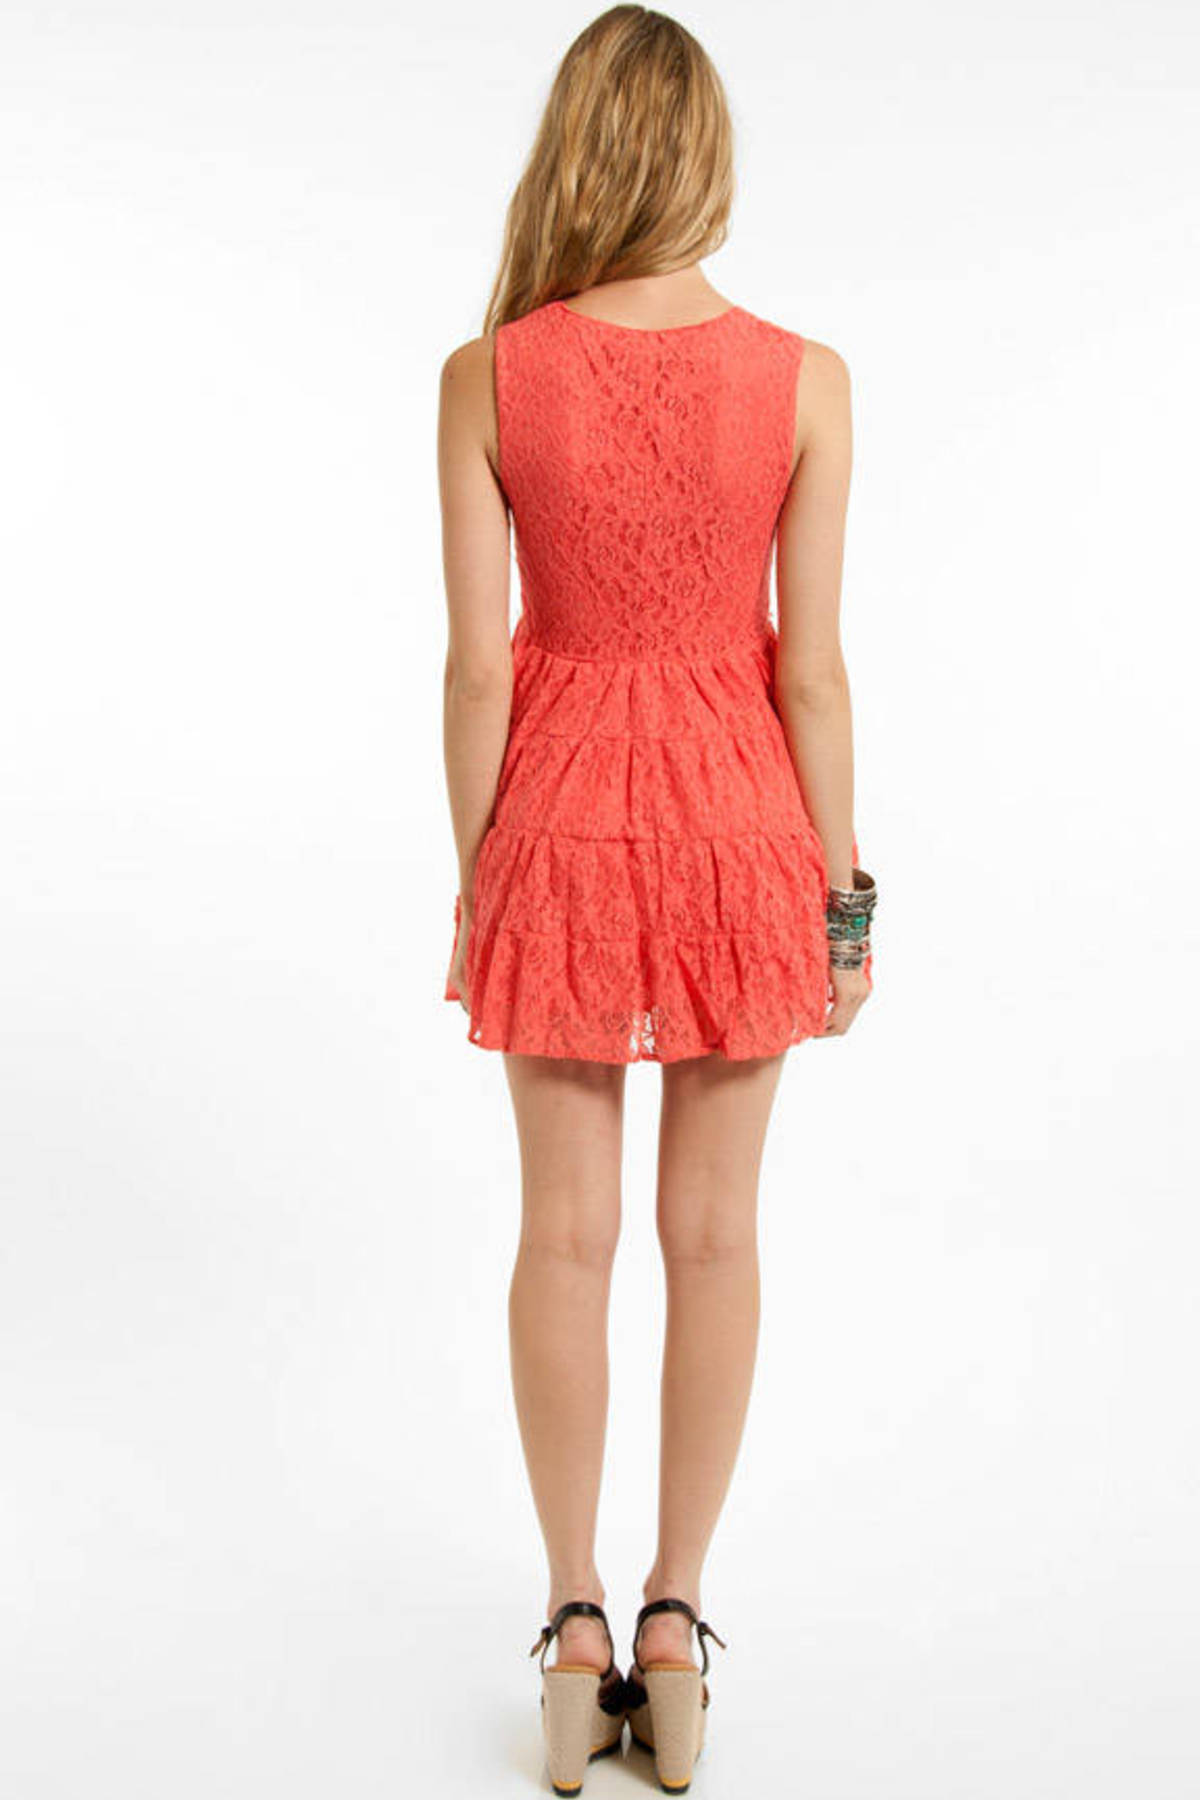 Lacey Sunday Belted Dress in Coral - $15 | Tobi US